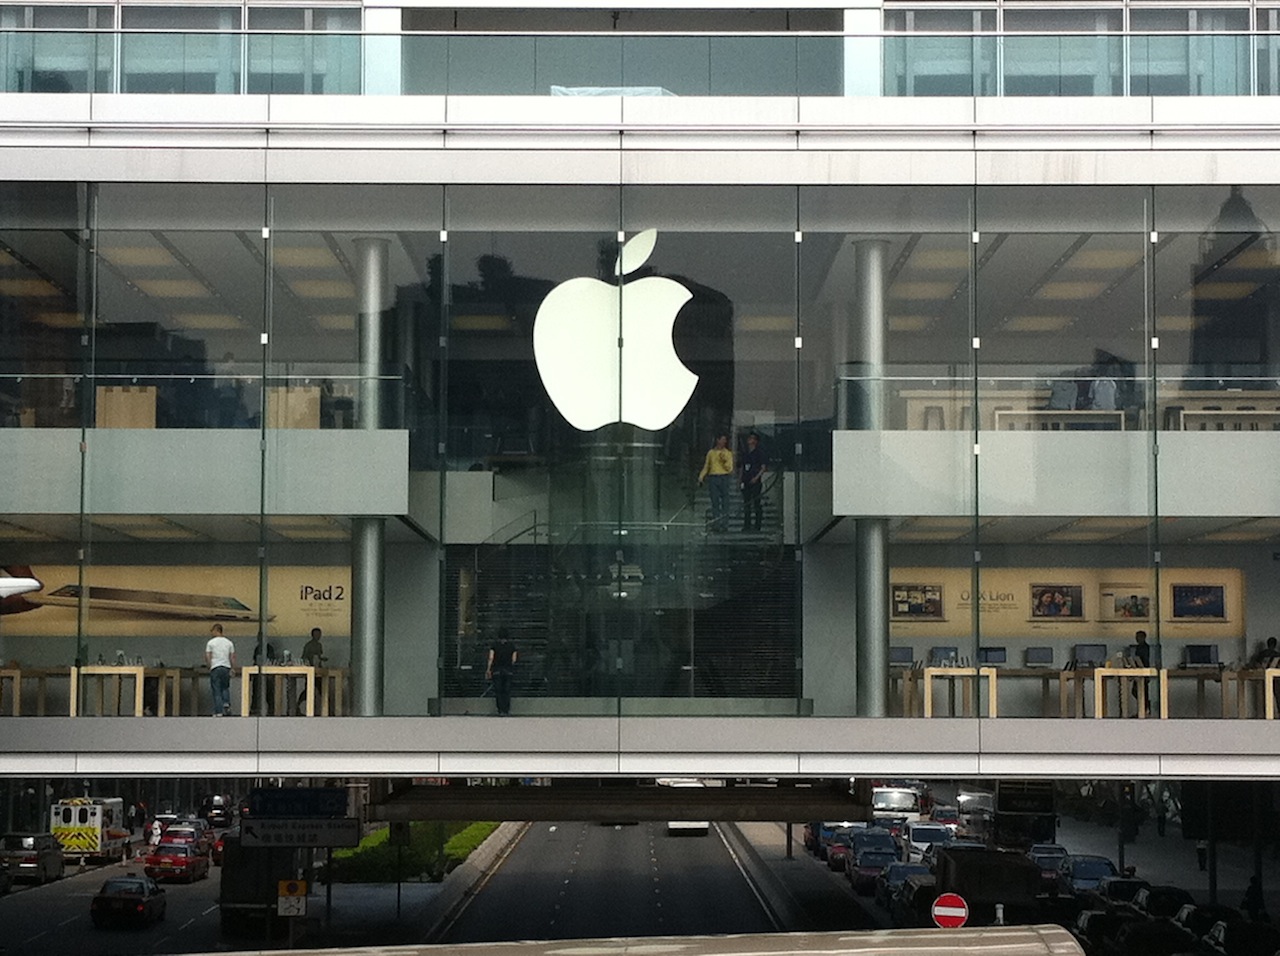 Curtains come off early at flagship Hong Kong Apple Store at IFC Center ...